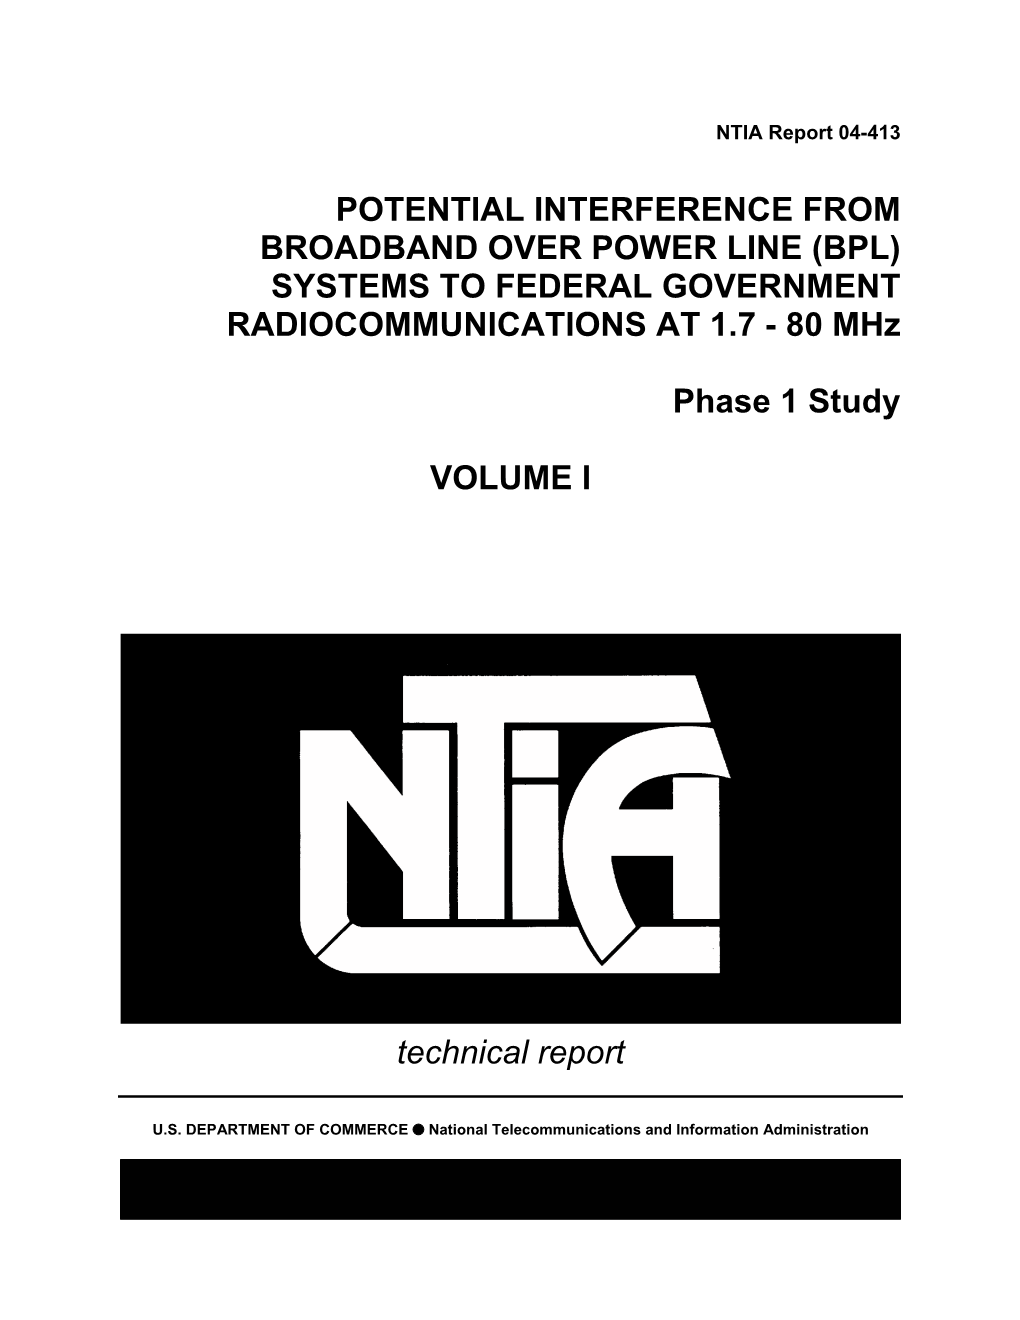 BPL) SYSTEMS to FEDERAL GOVERNMENT RADIOCOMMUNICATIONS at 1.7 - 80 Mhz